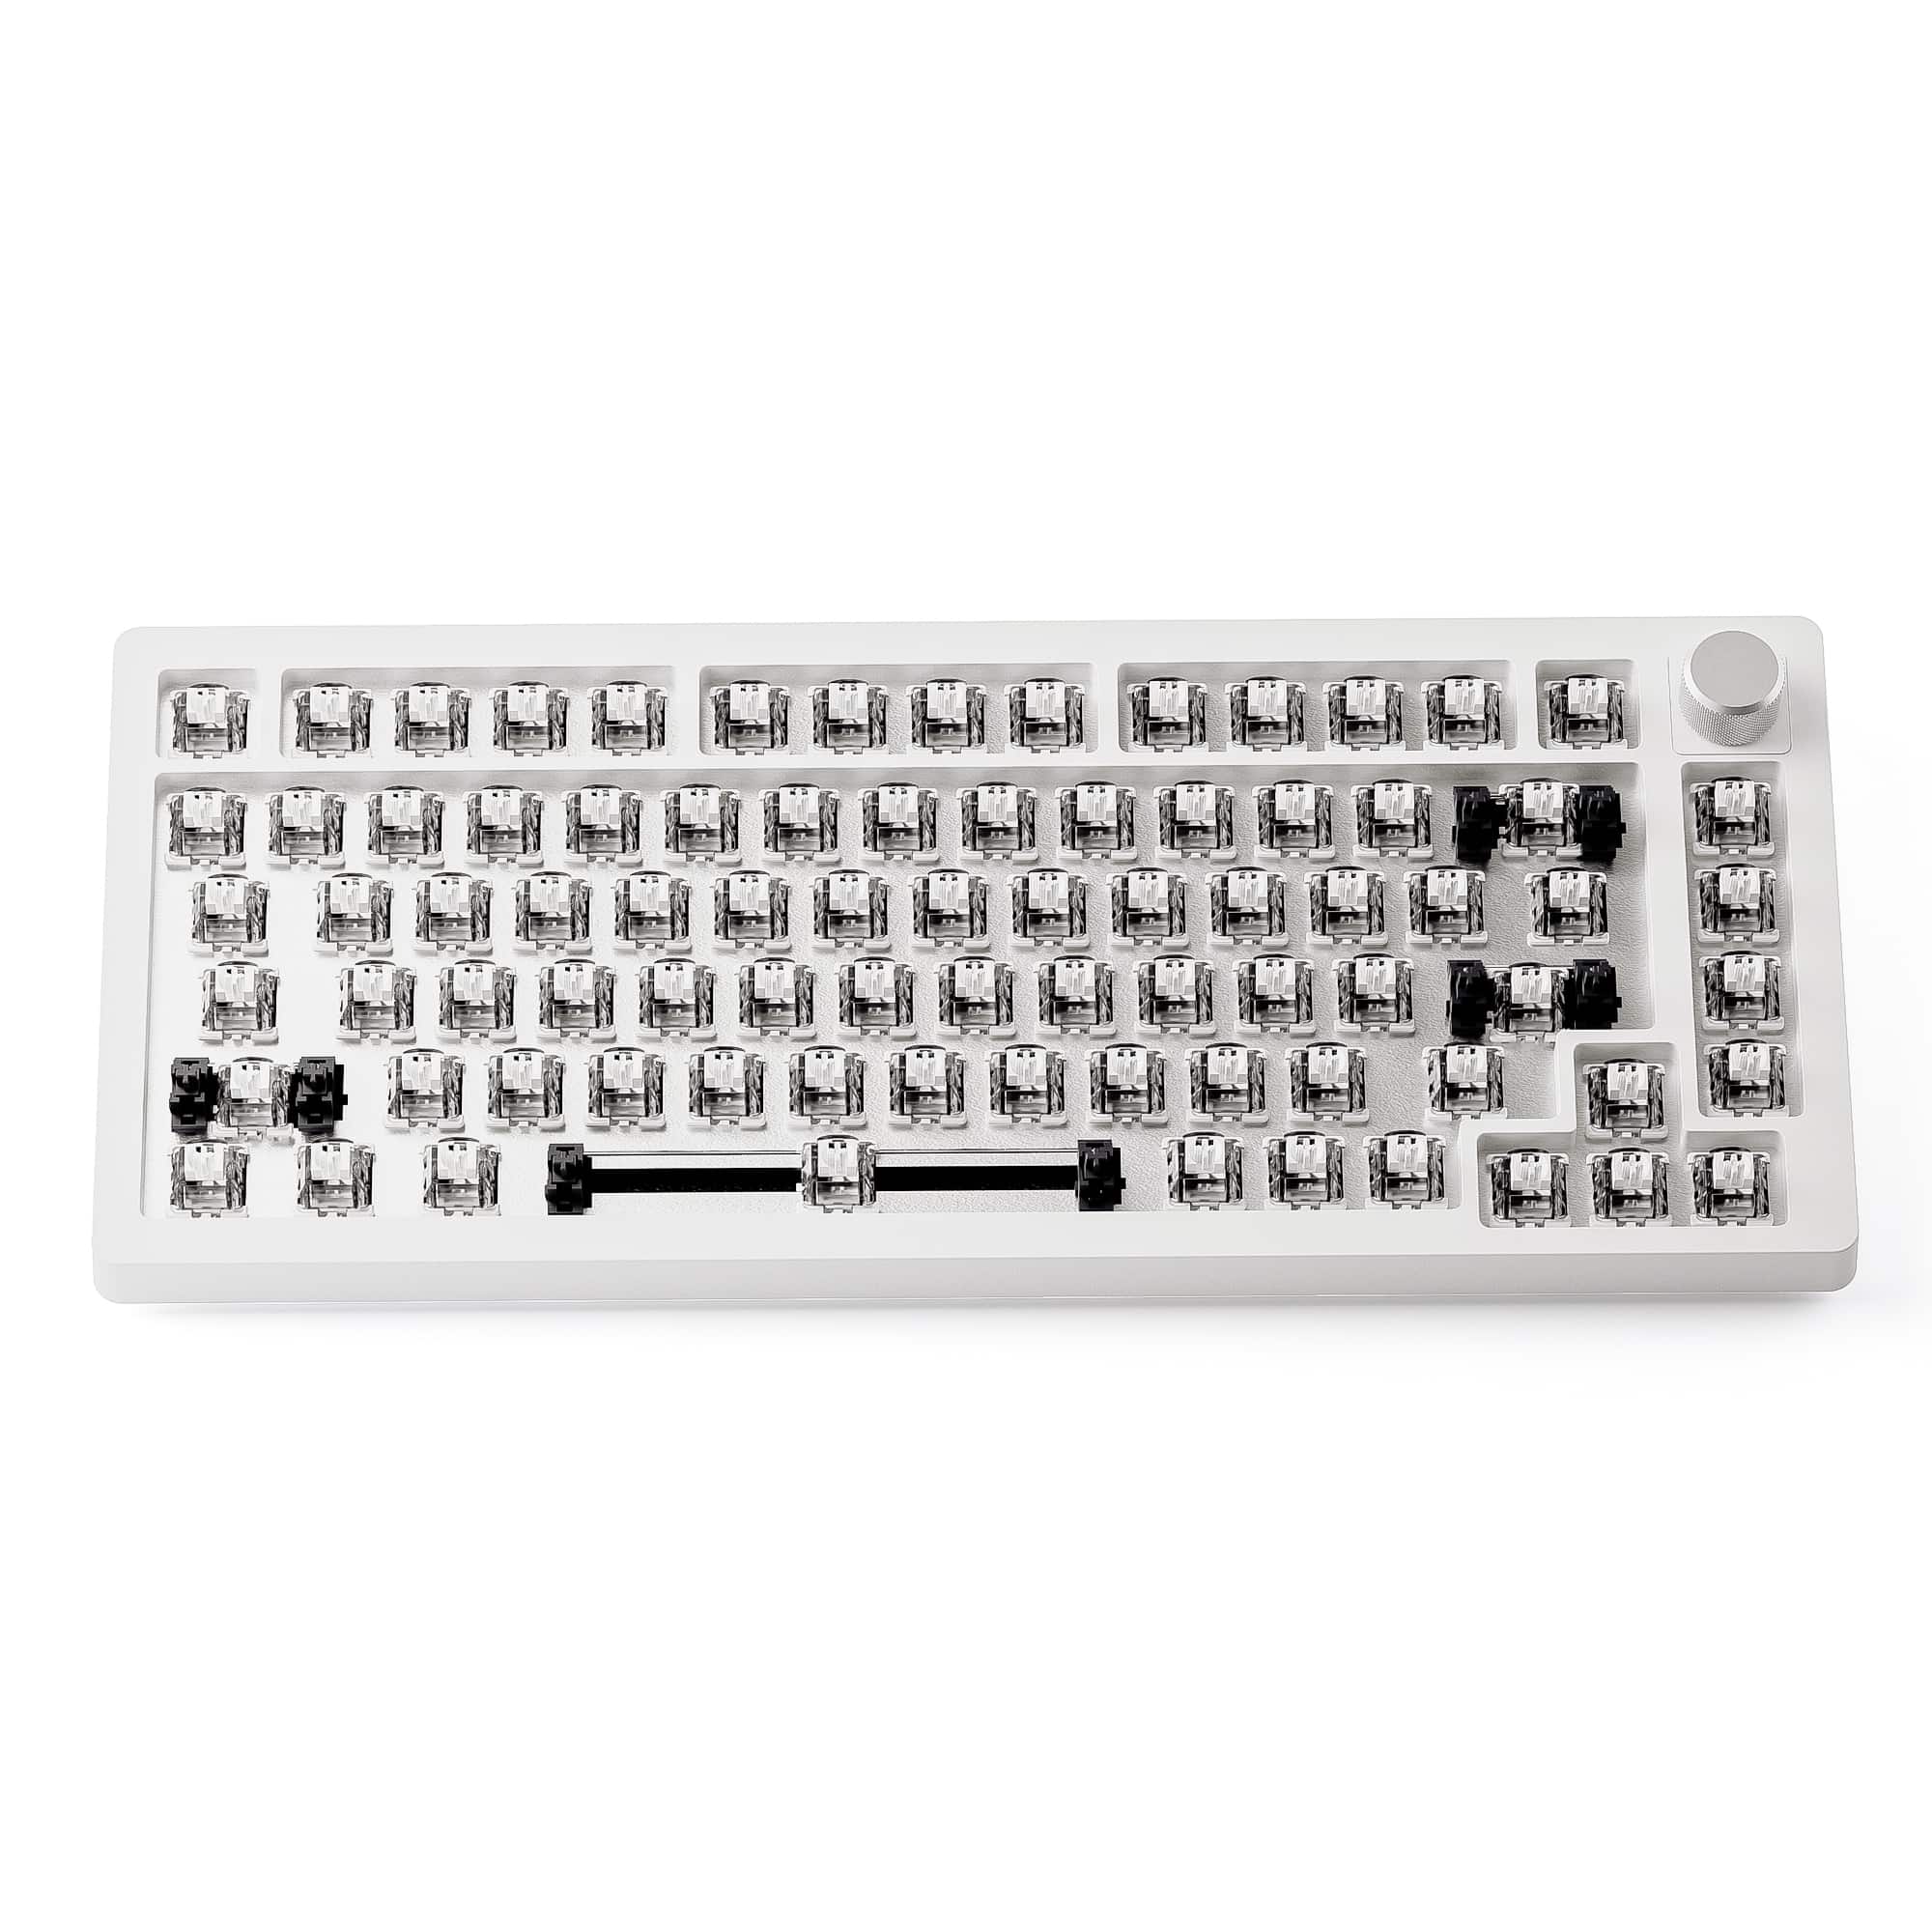 DrunkDeer A75 - Wired Actuation-Distance-Adjustable Magnetic Switch Keyboard